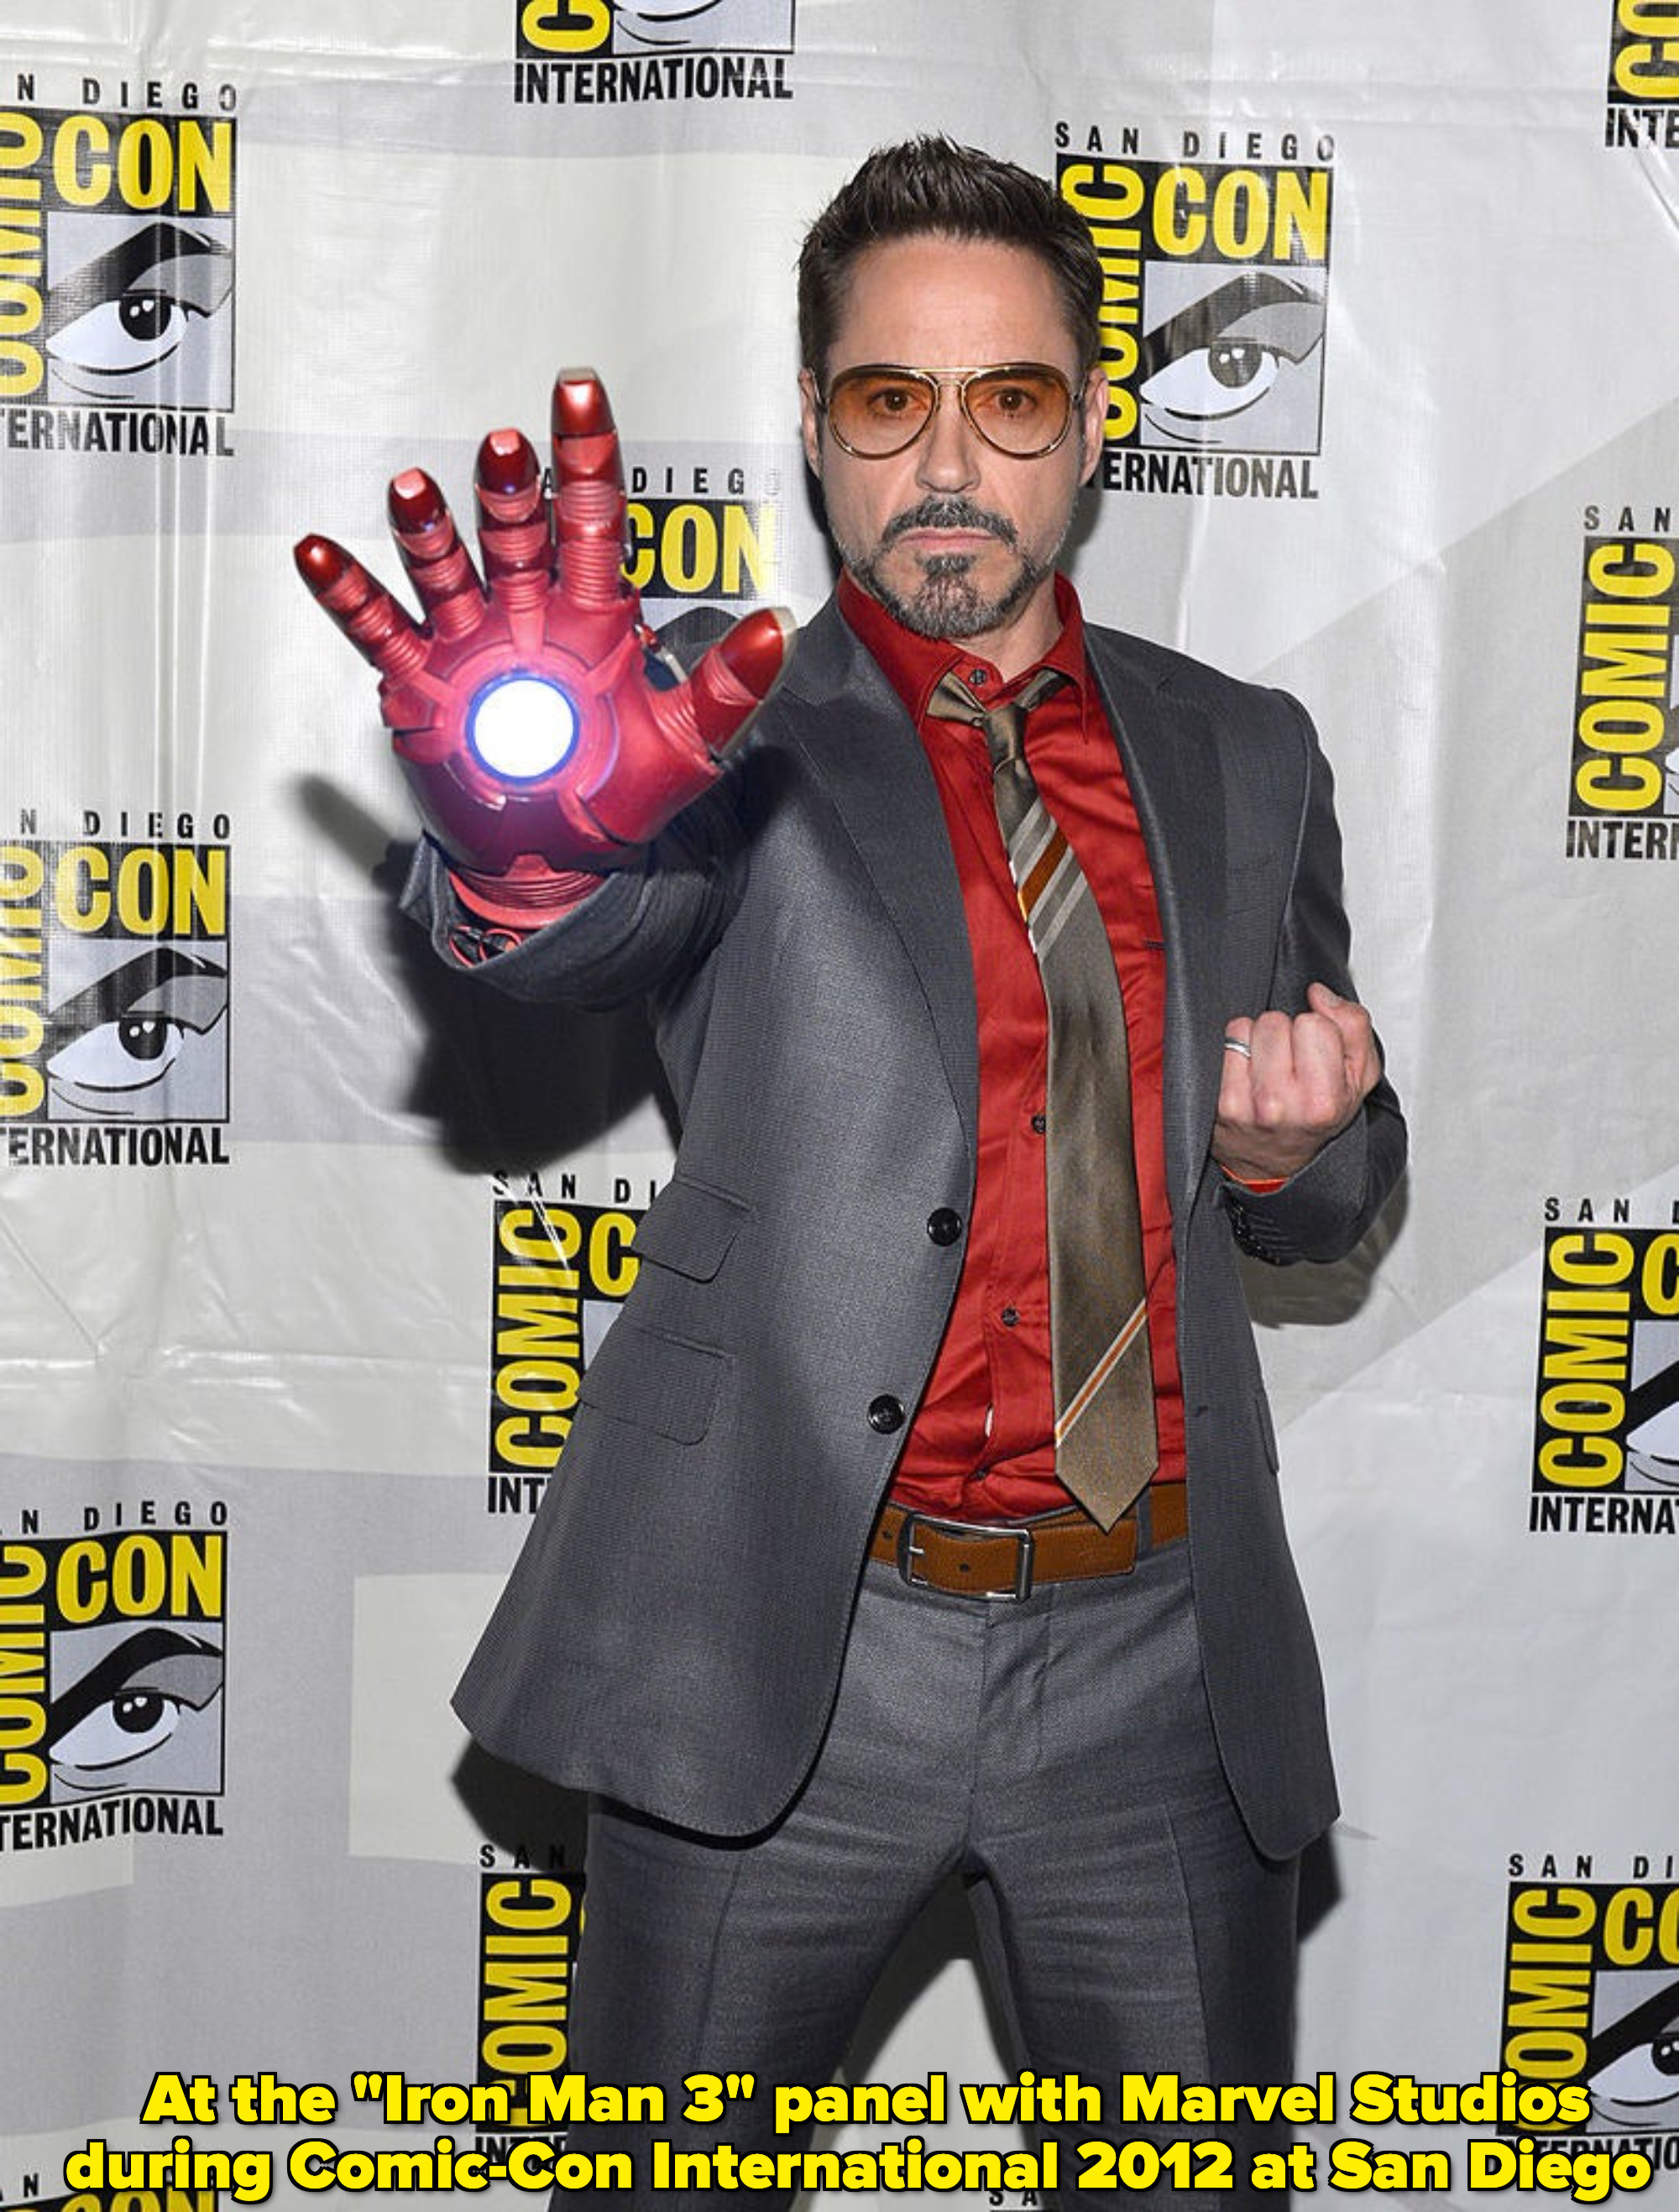 Robert Downey Jr at San Diego Comic Con with an Iron Man hand